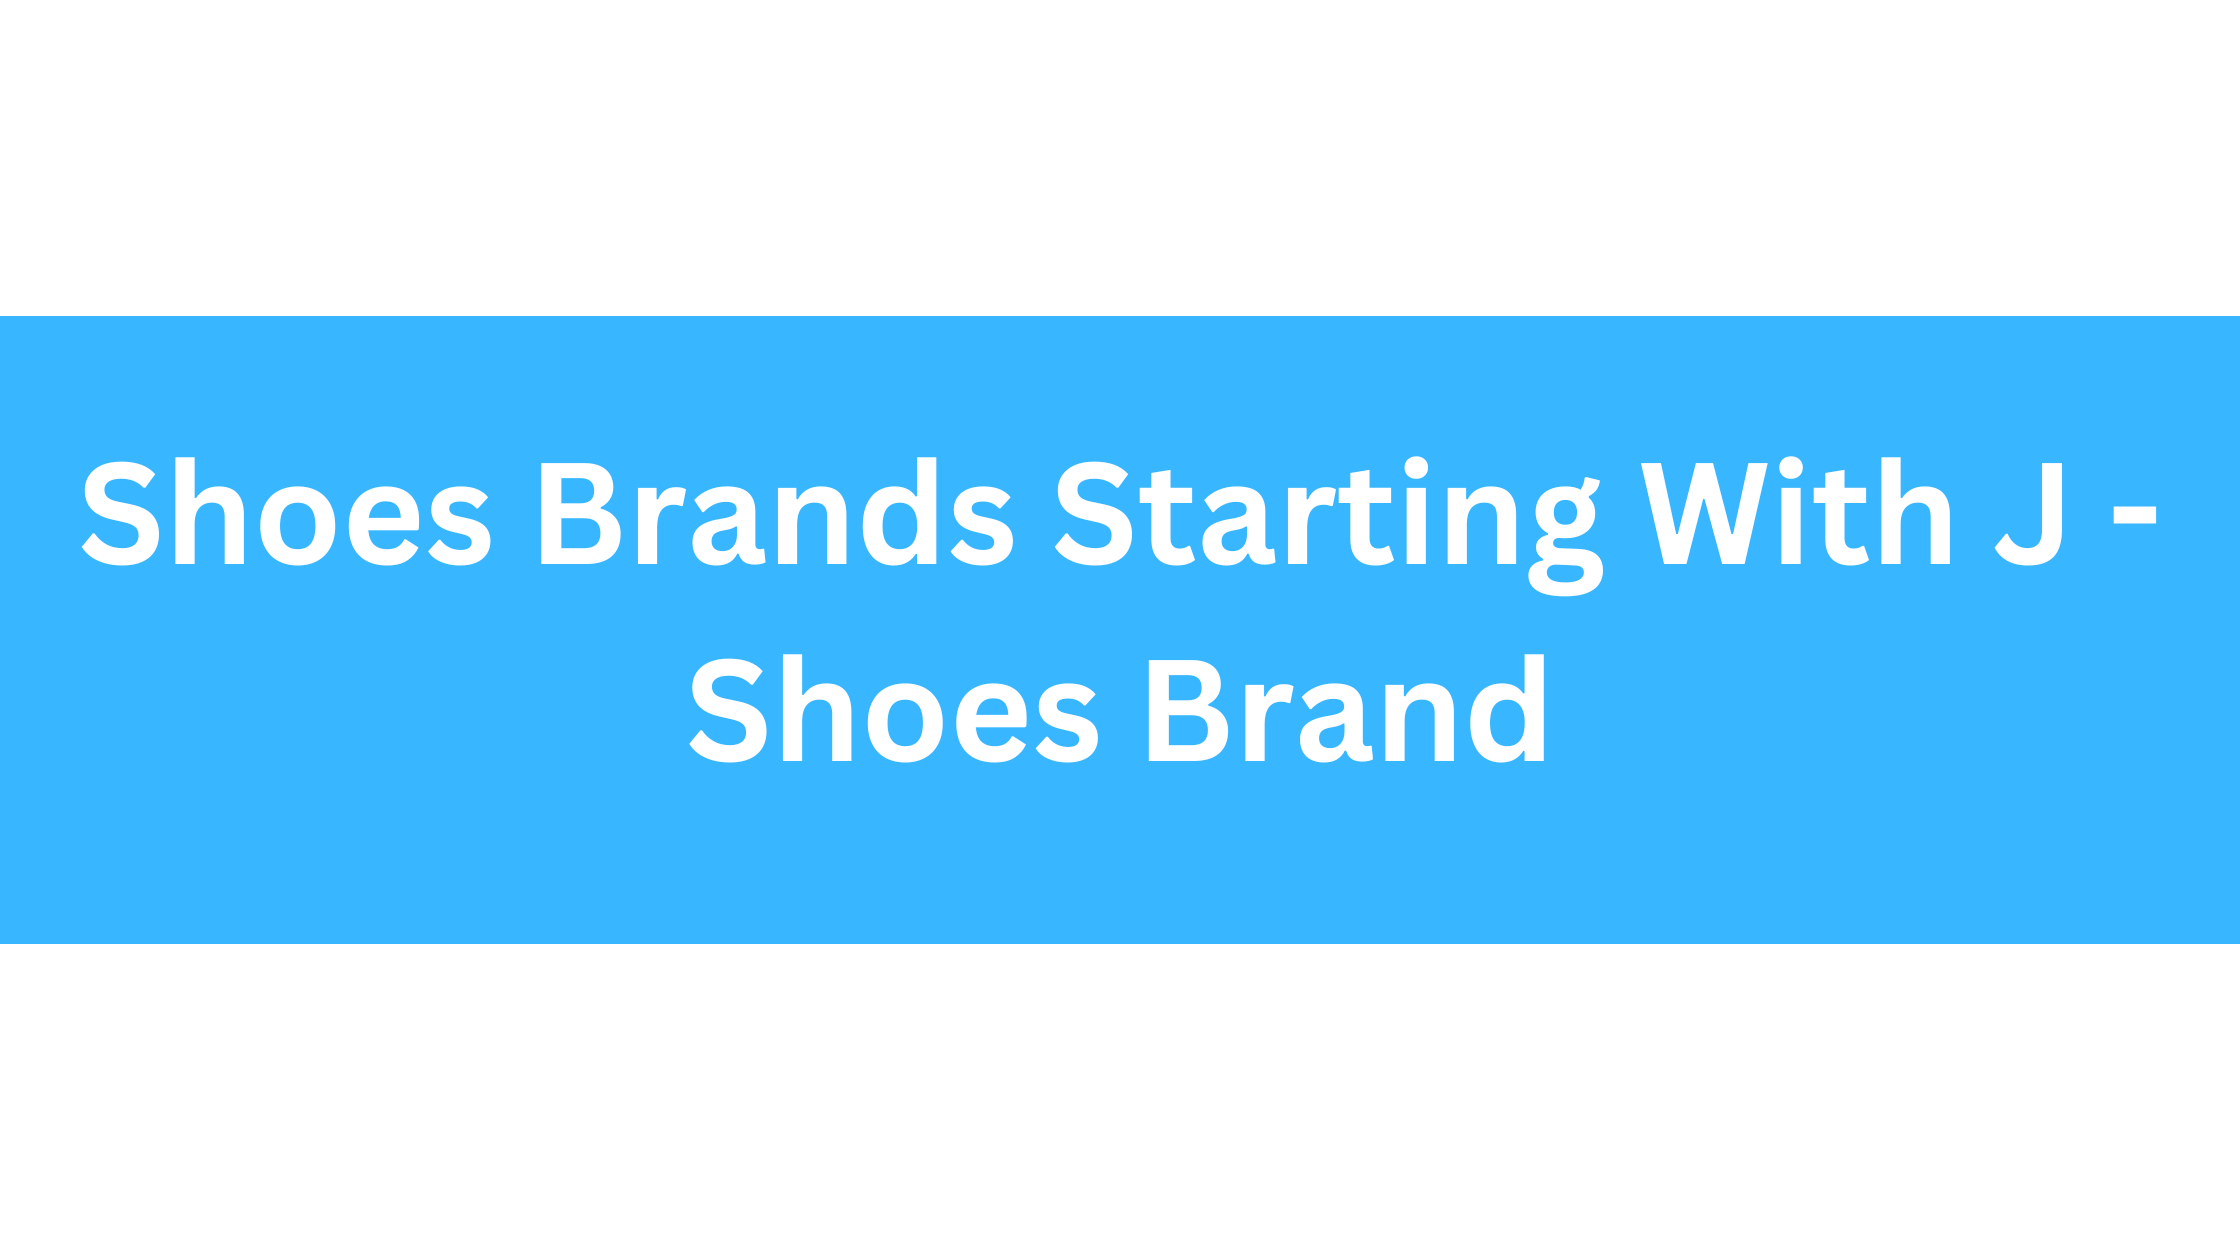 Shoes Brands Starting With J